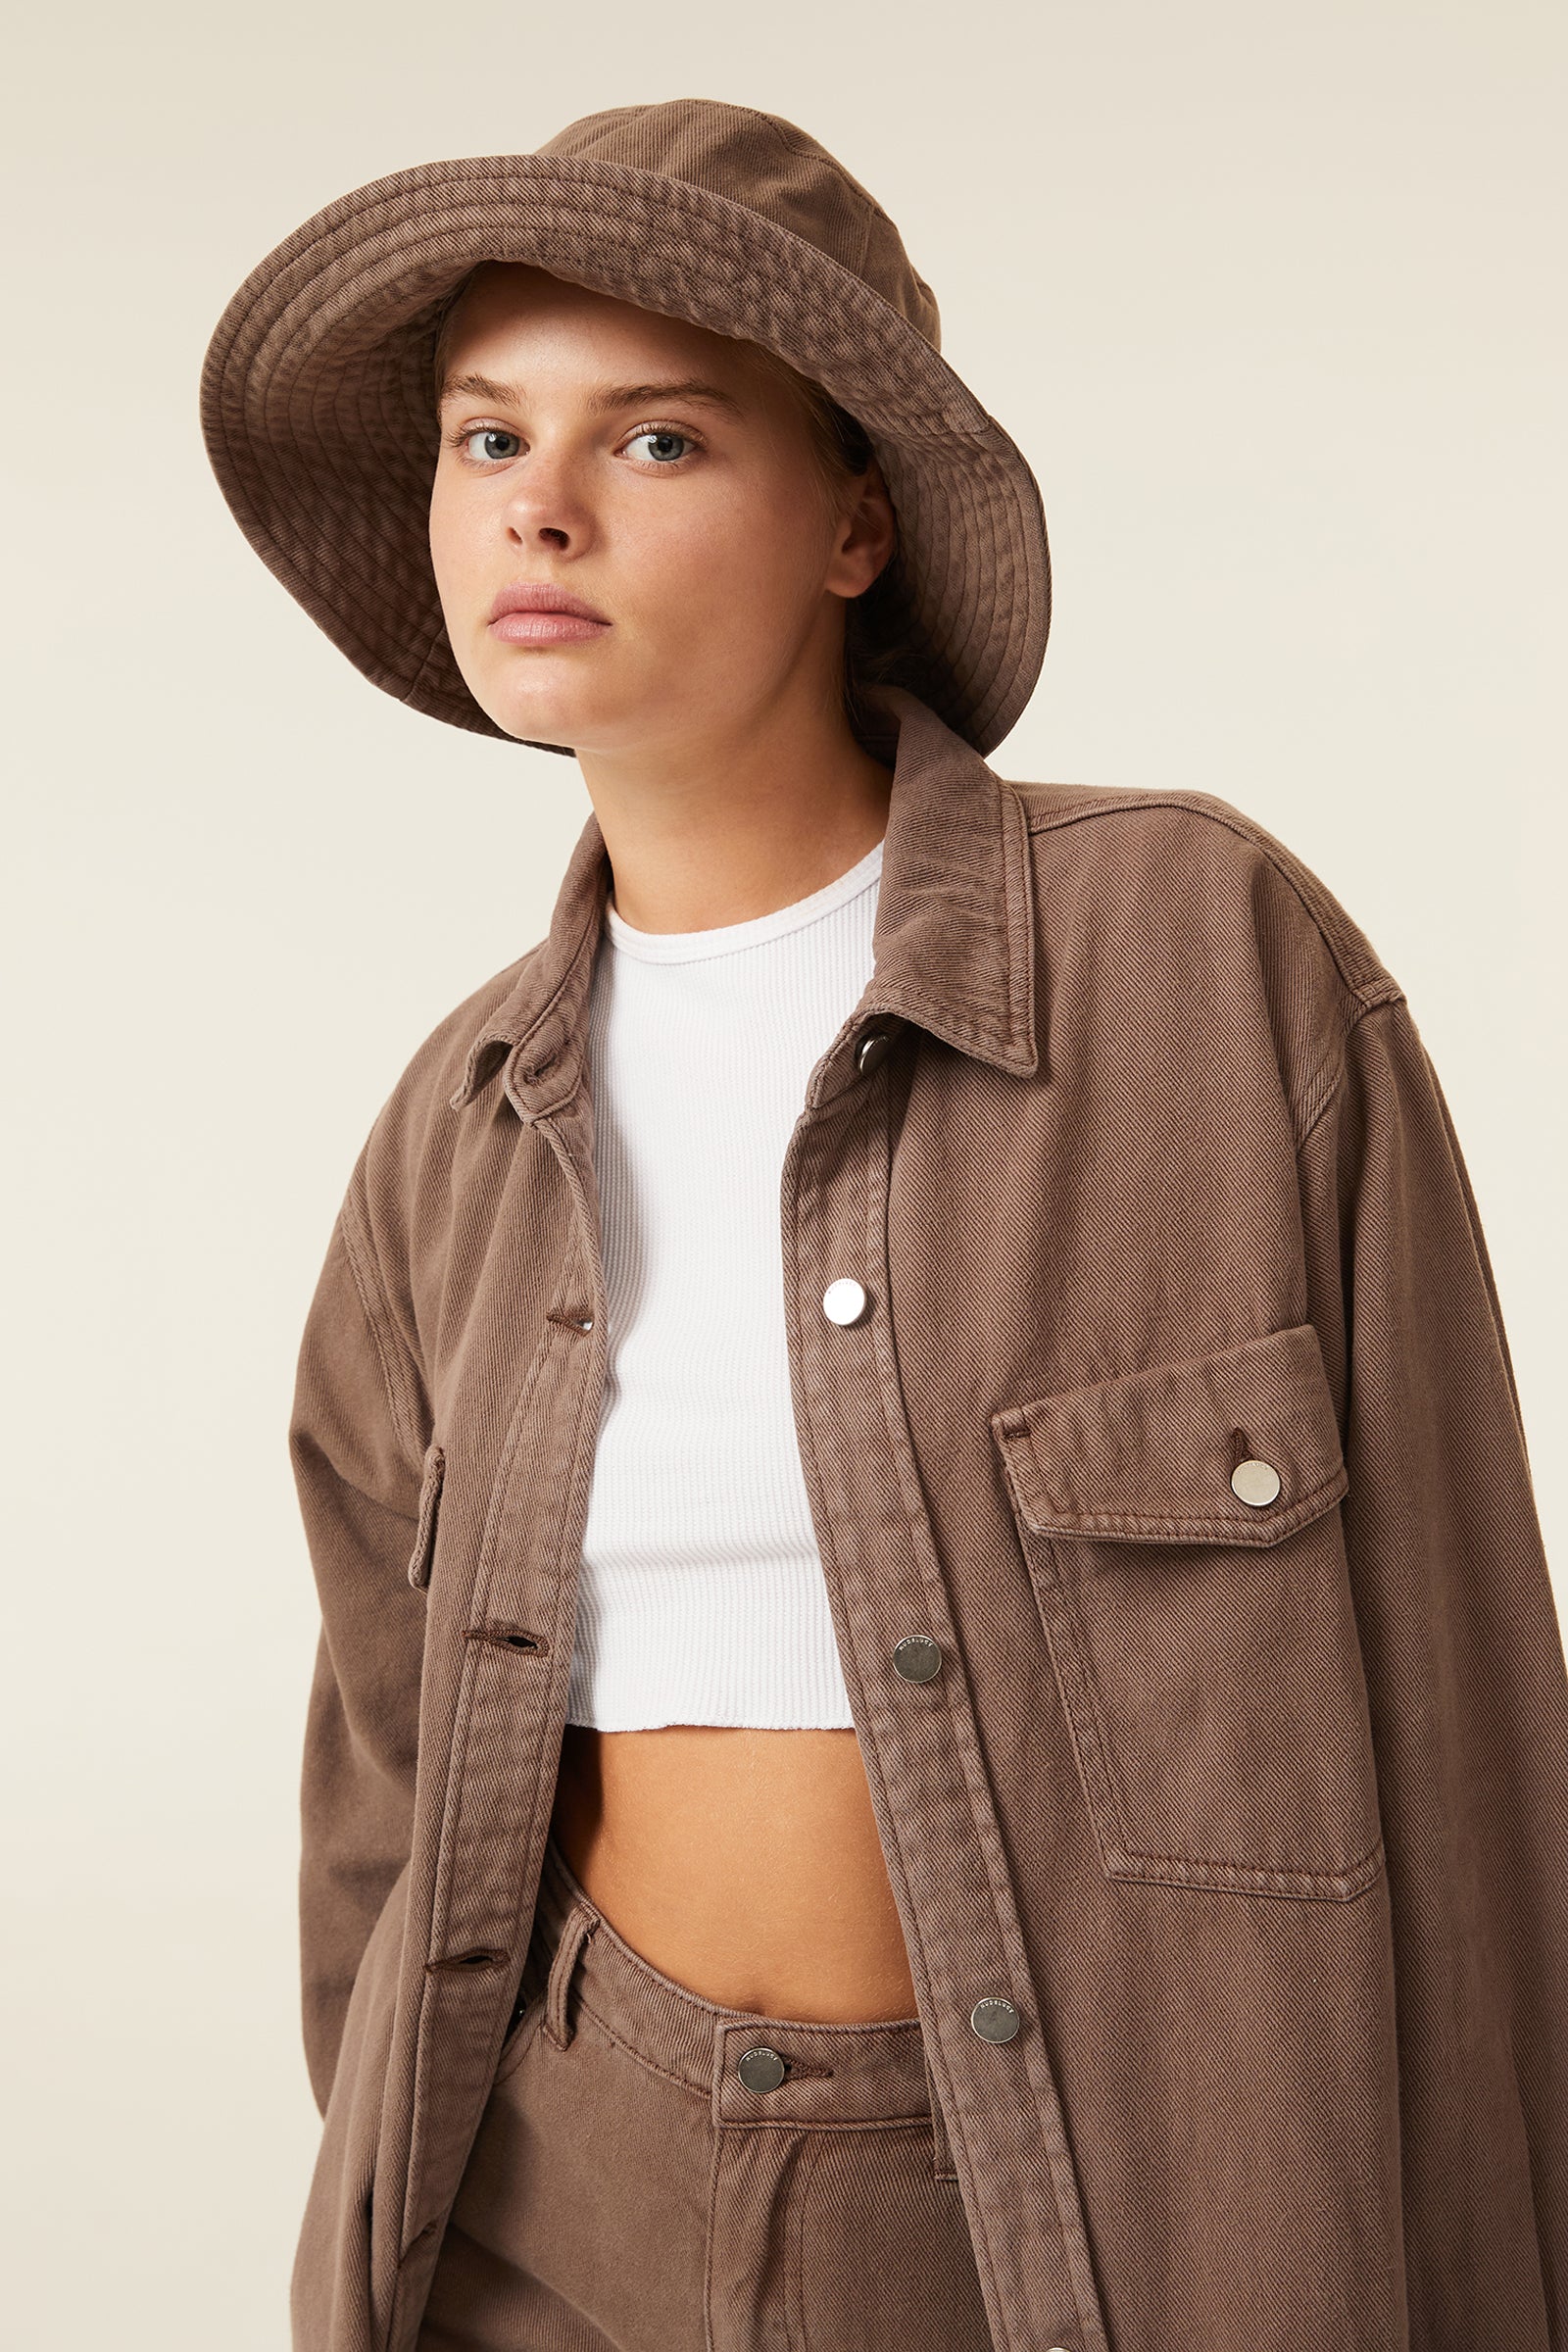 Nude Lucy Nude Denim Bucket Hat in a Brown Carob Colour